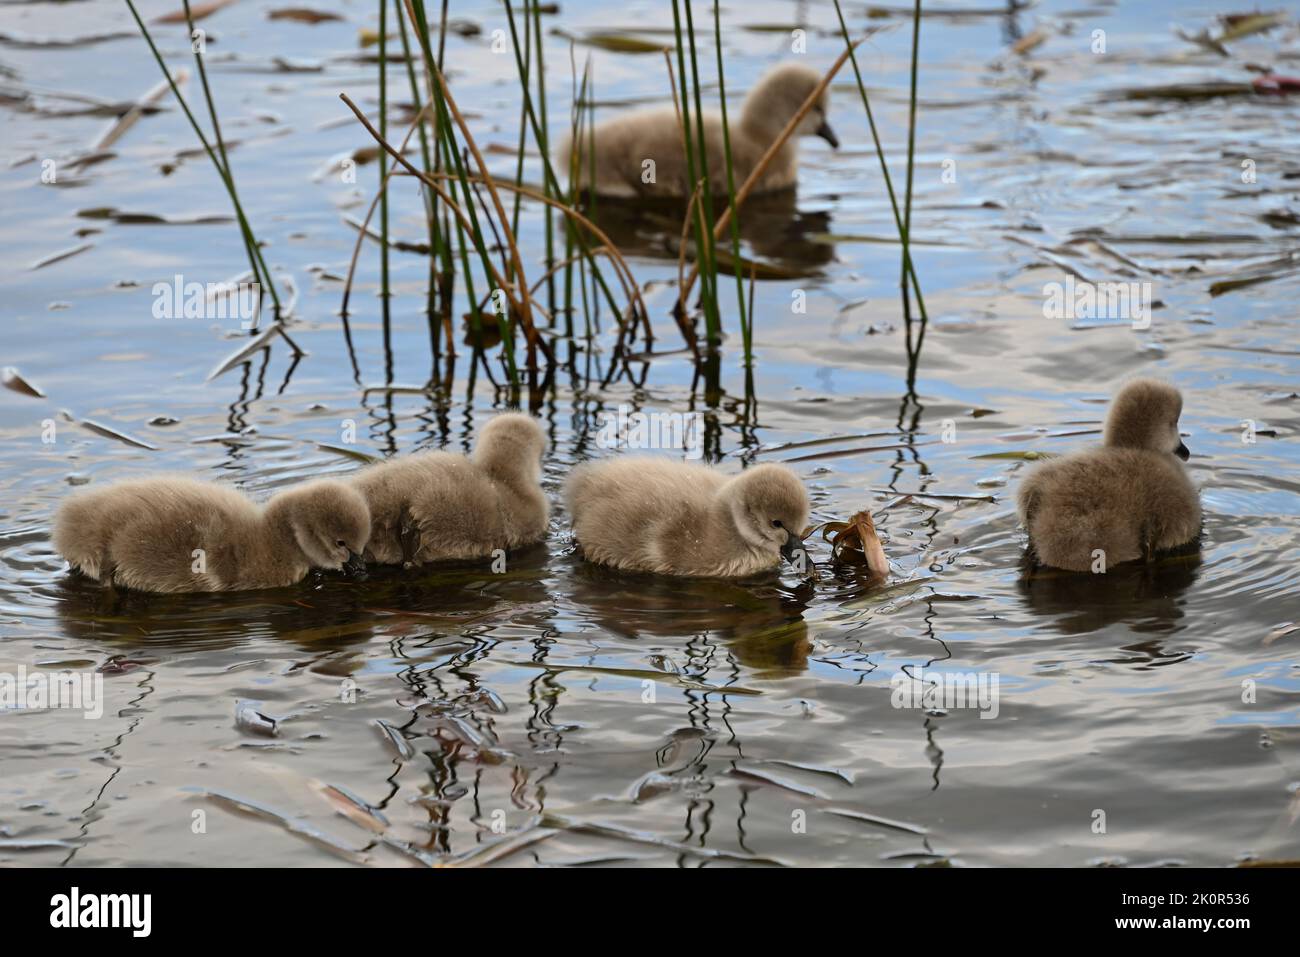 A group of four baby black swans, or cygnets, foraging for food in a lake, with a fifth cygnet in the background behind reeds Stock Photo